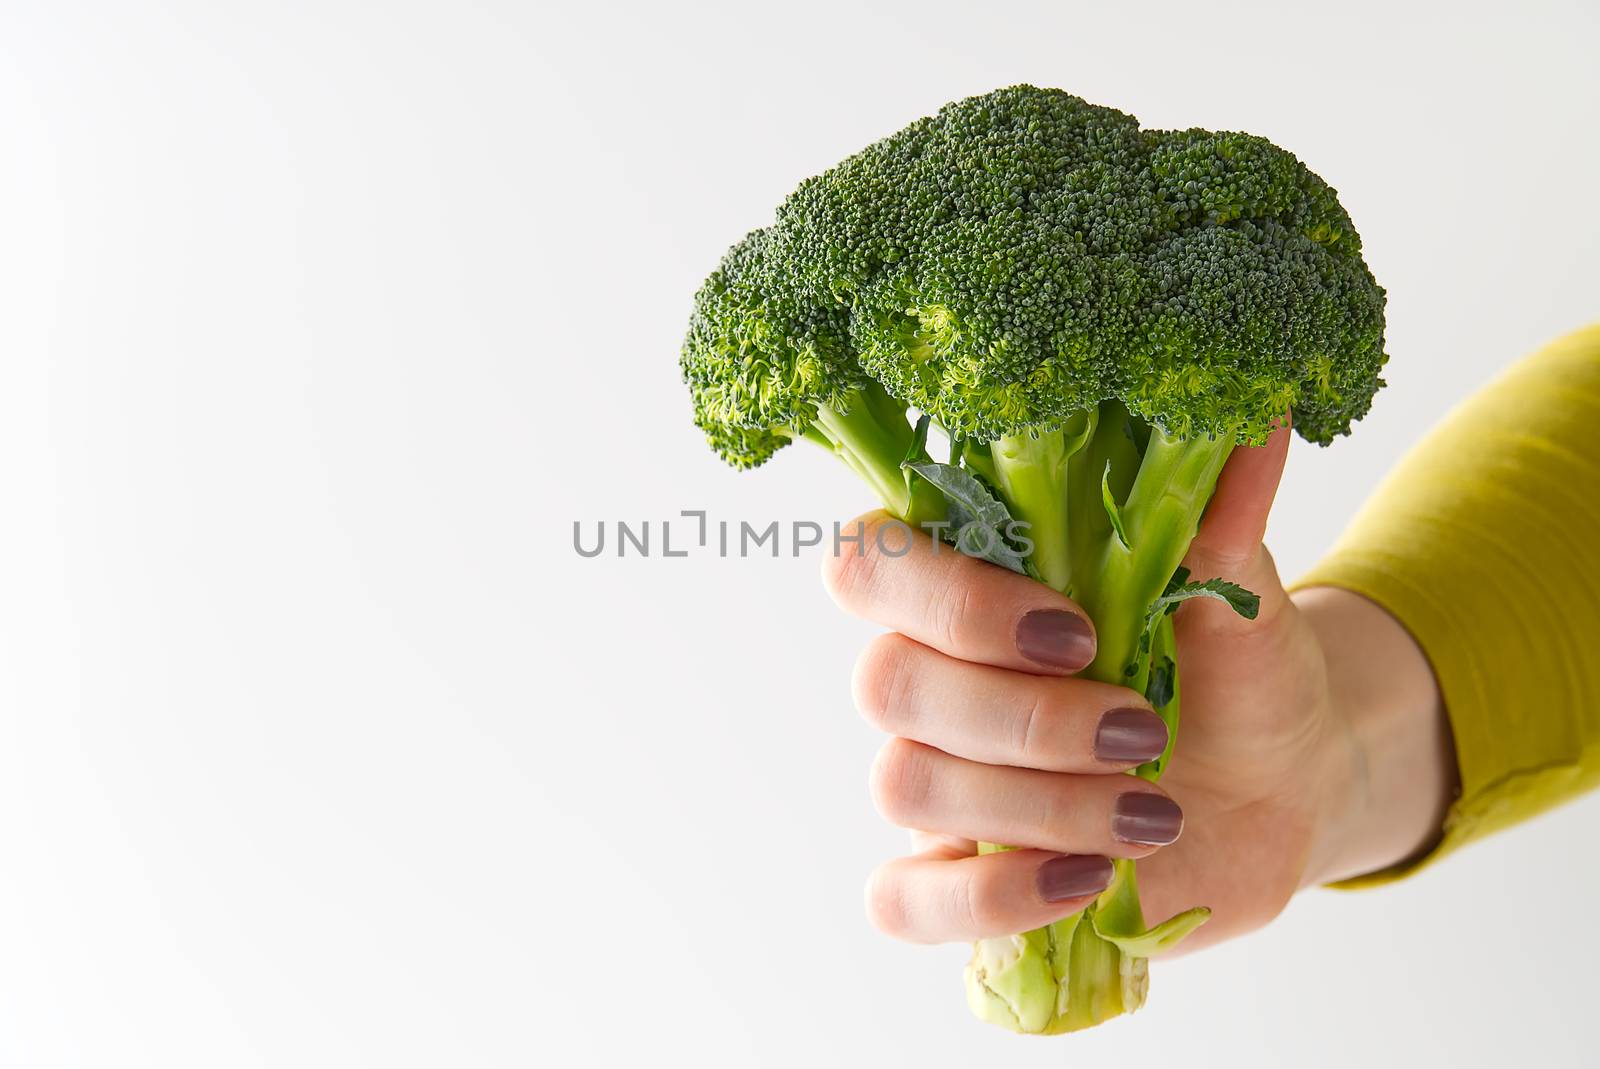 Fresh Organic Green Broccoli in Woman's Hand, Concept Healthy Food. Female Hand Holding Broccoli Isolated on White Background